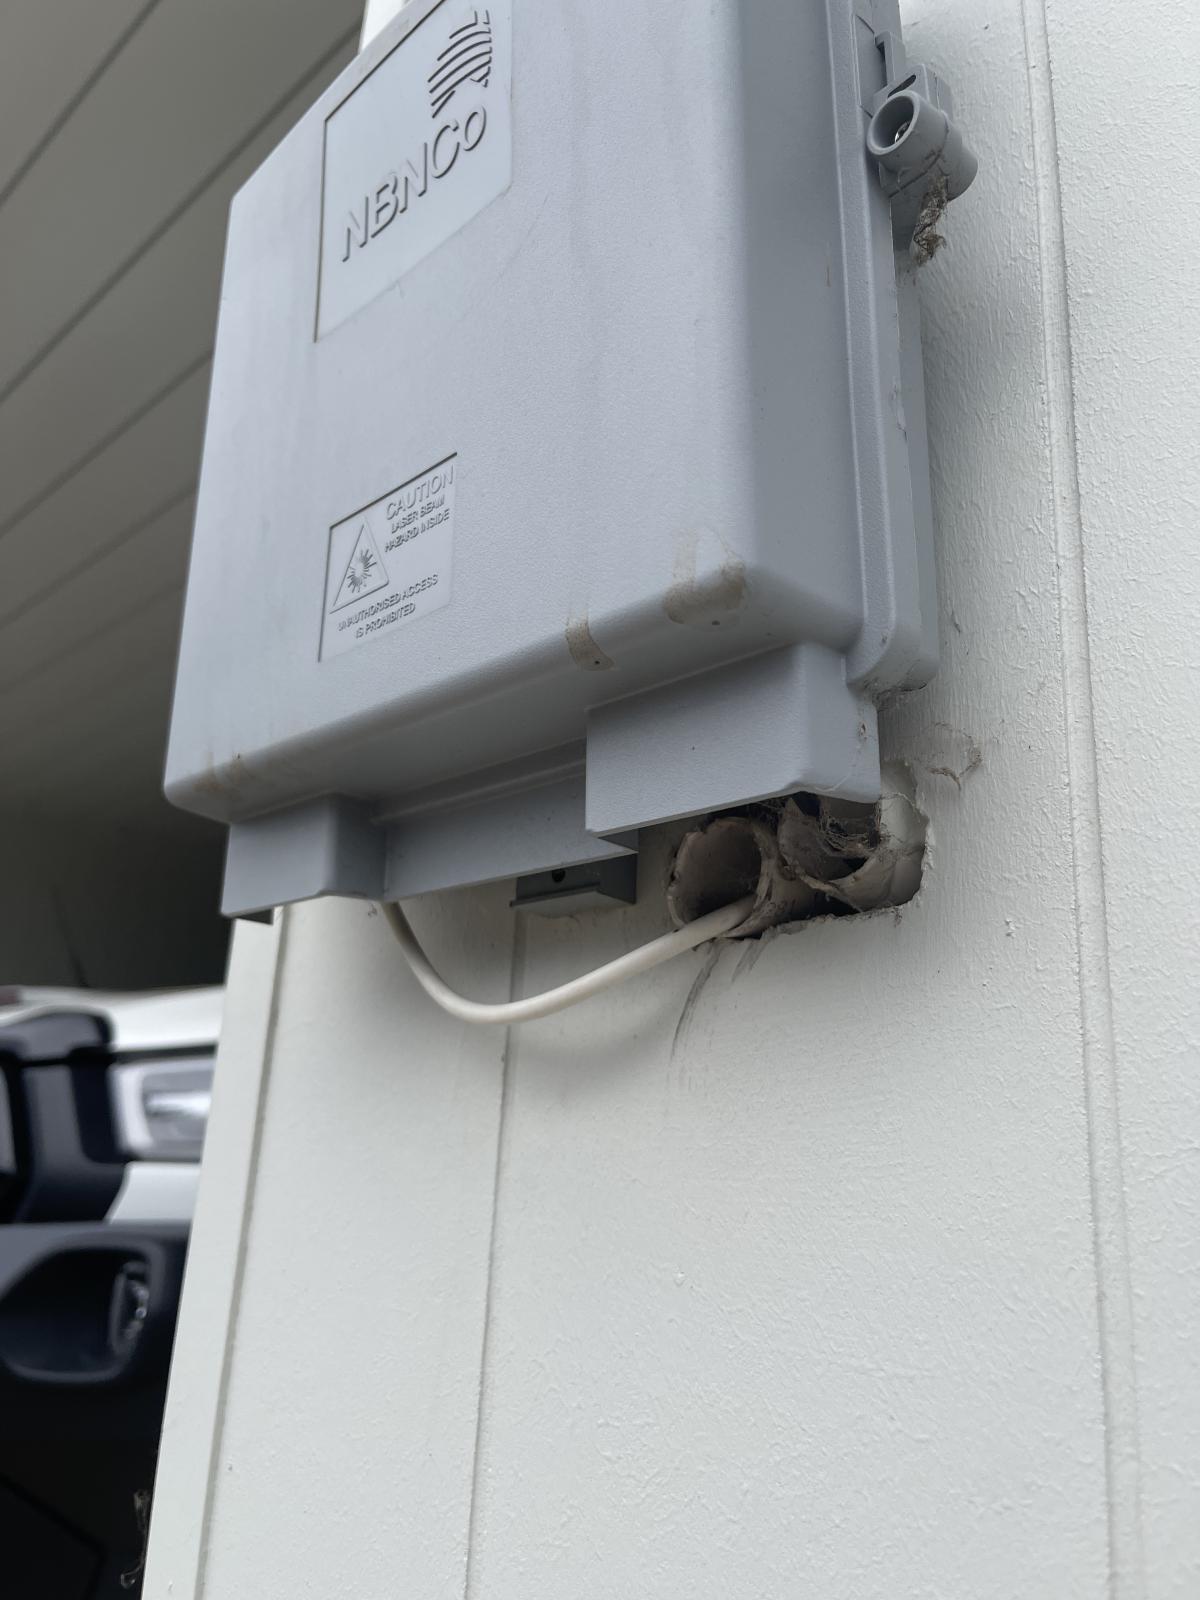 Exposed wires/conduits NBN box